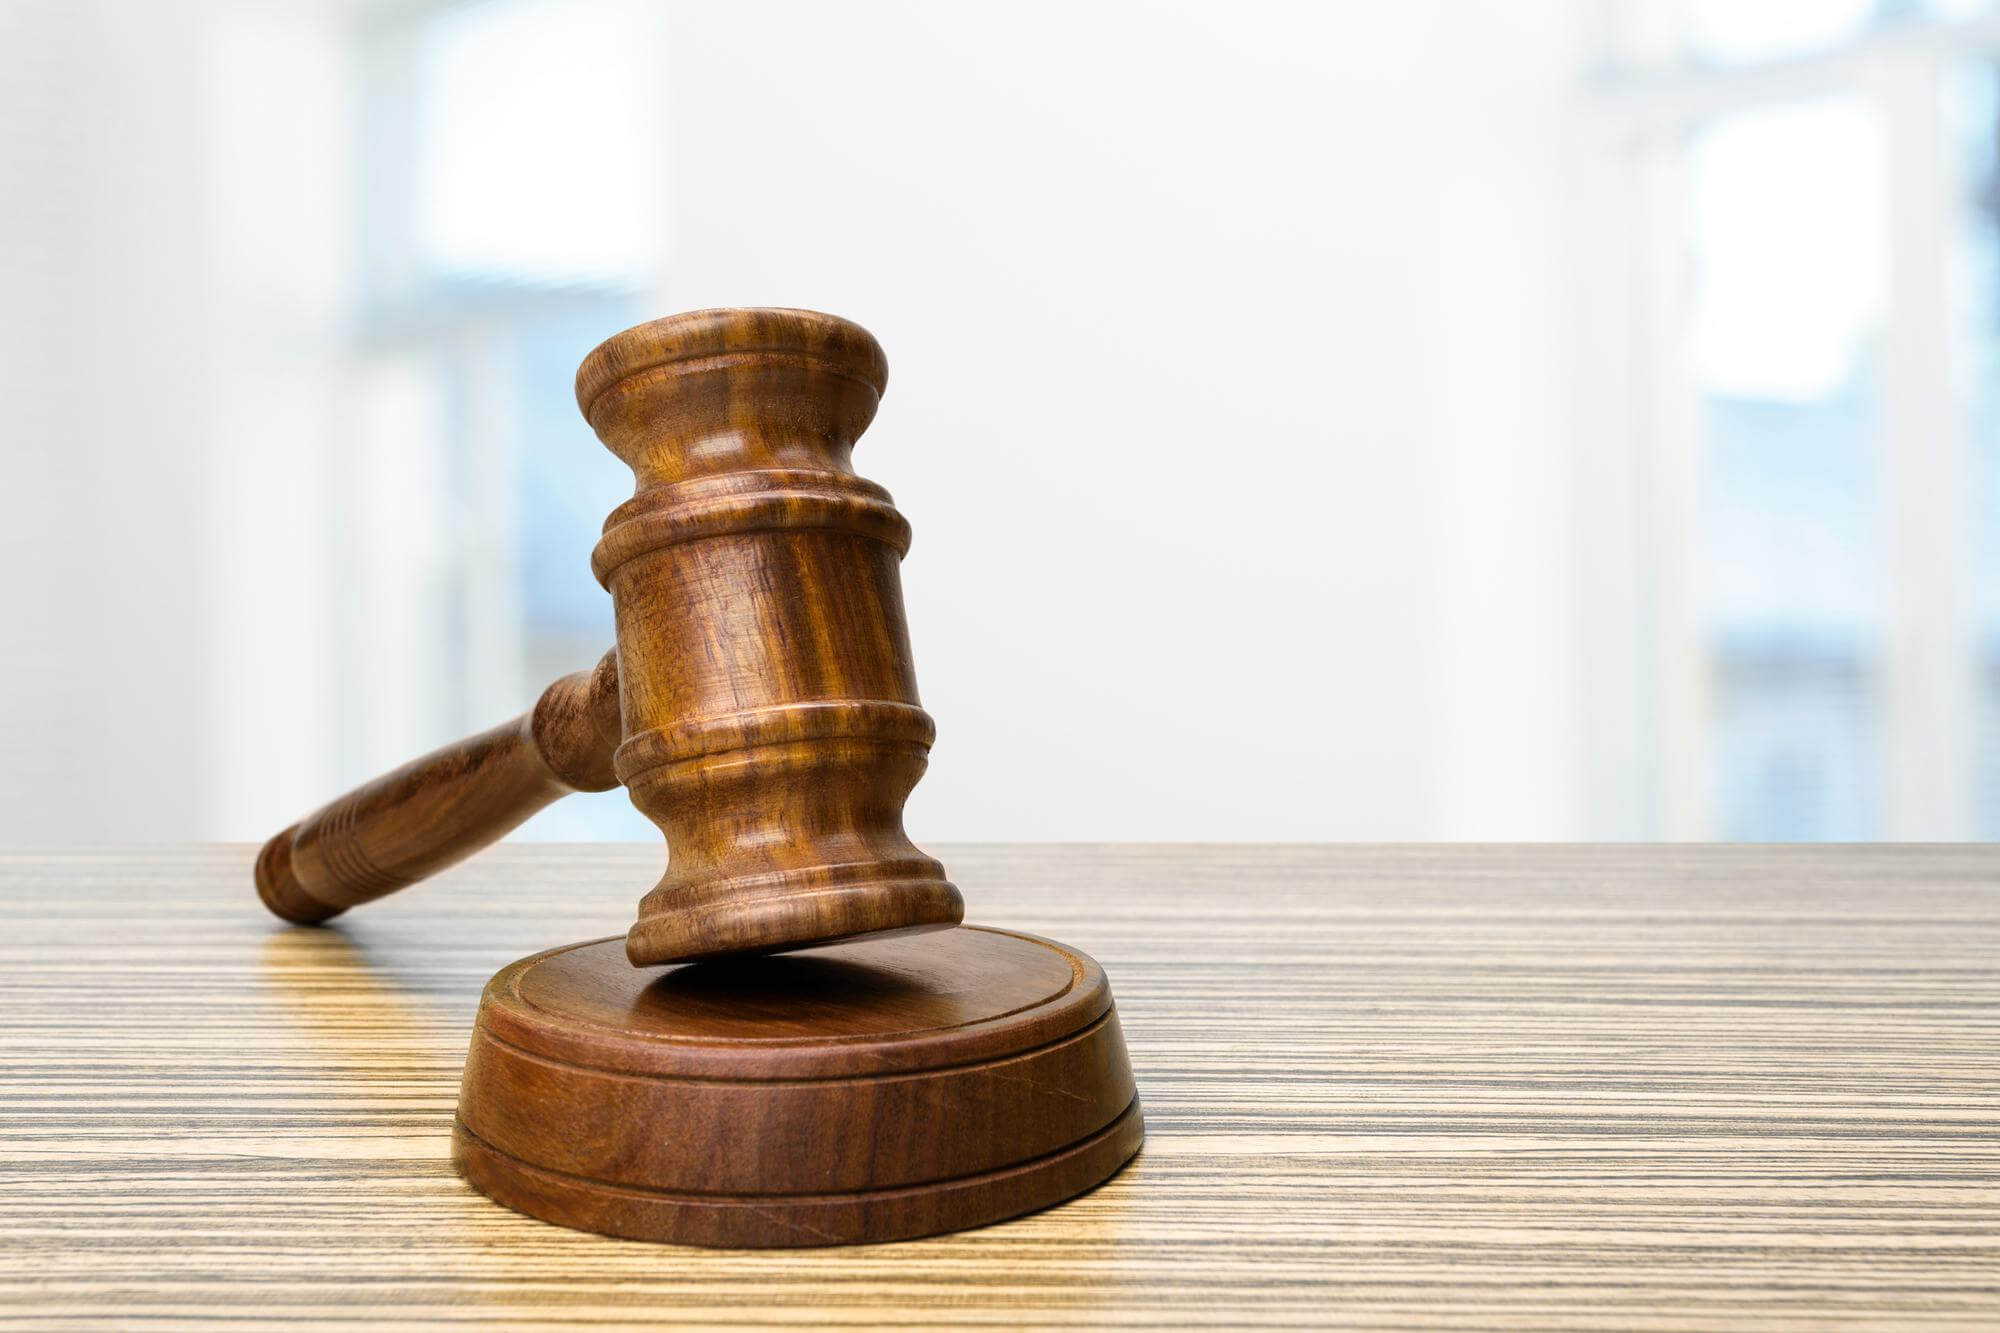 Wooden gavel - VAIL RESORTS LOSES LAWSUIT